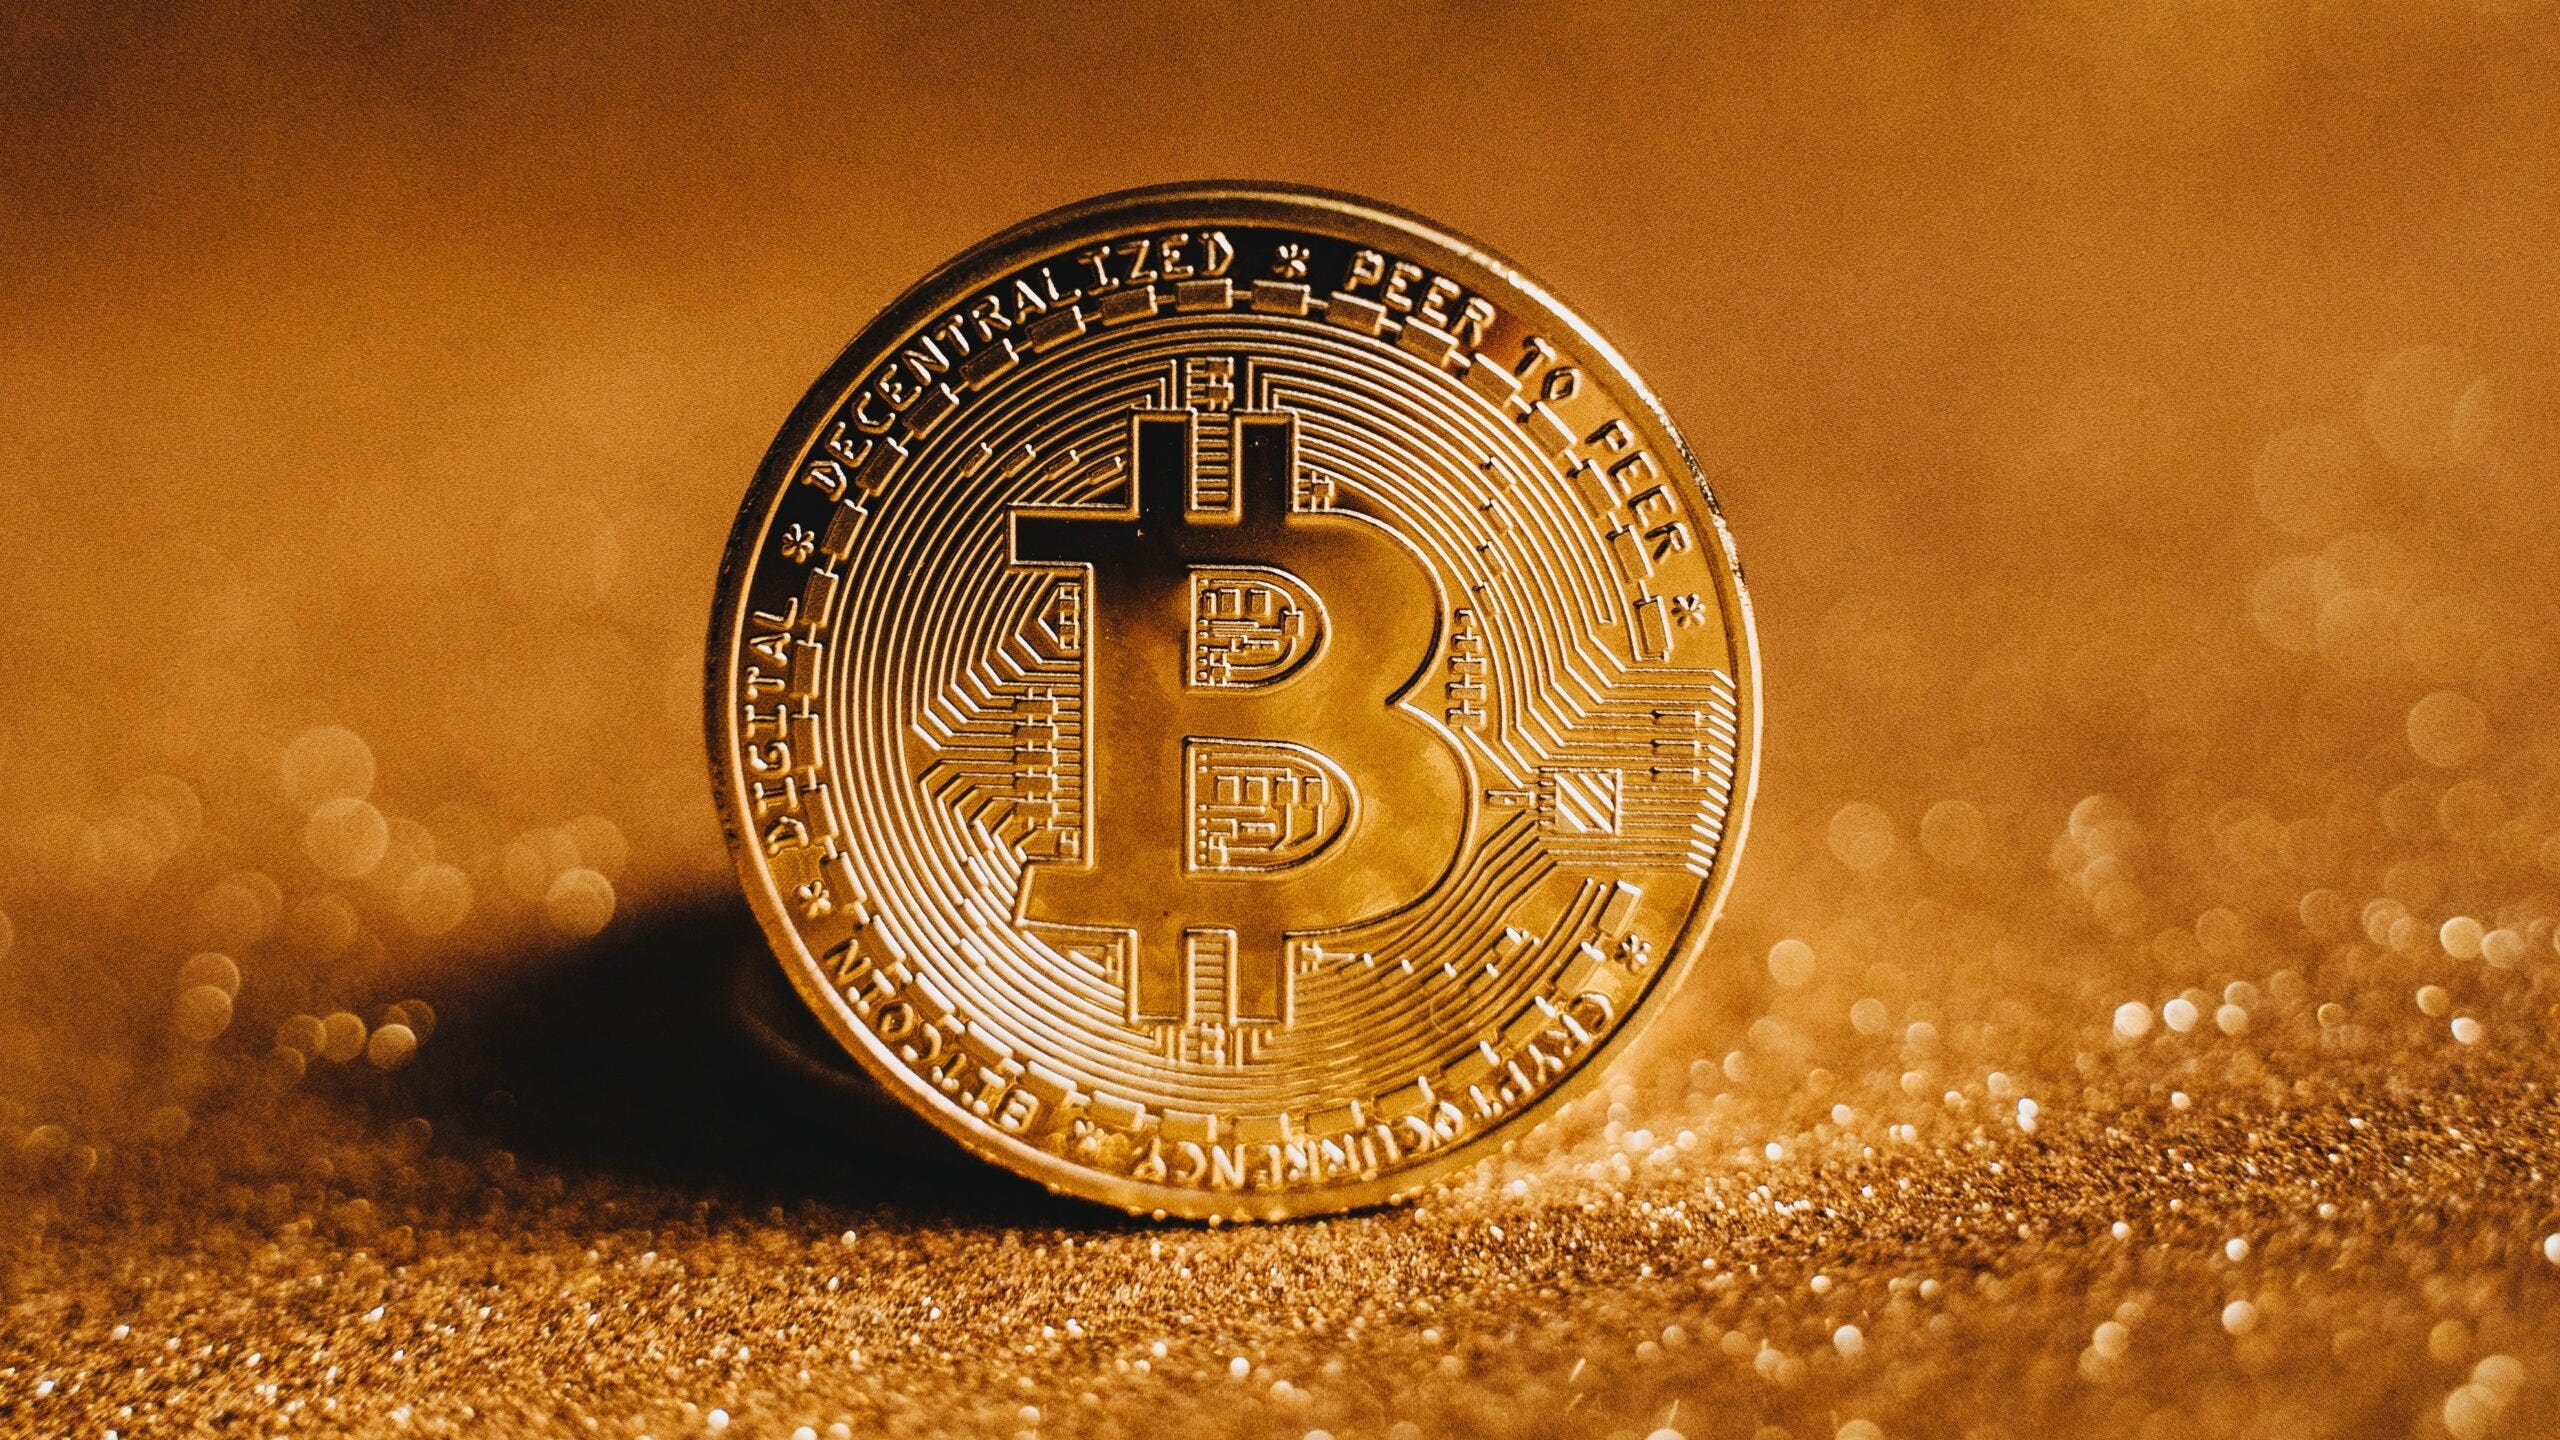 Bitcoin has surged 35% since ETF launch in January. What's next for investors - The Economic Times